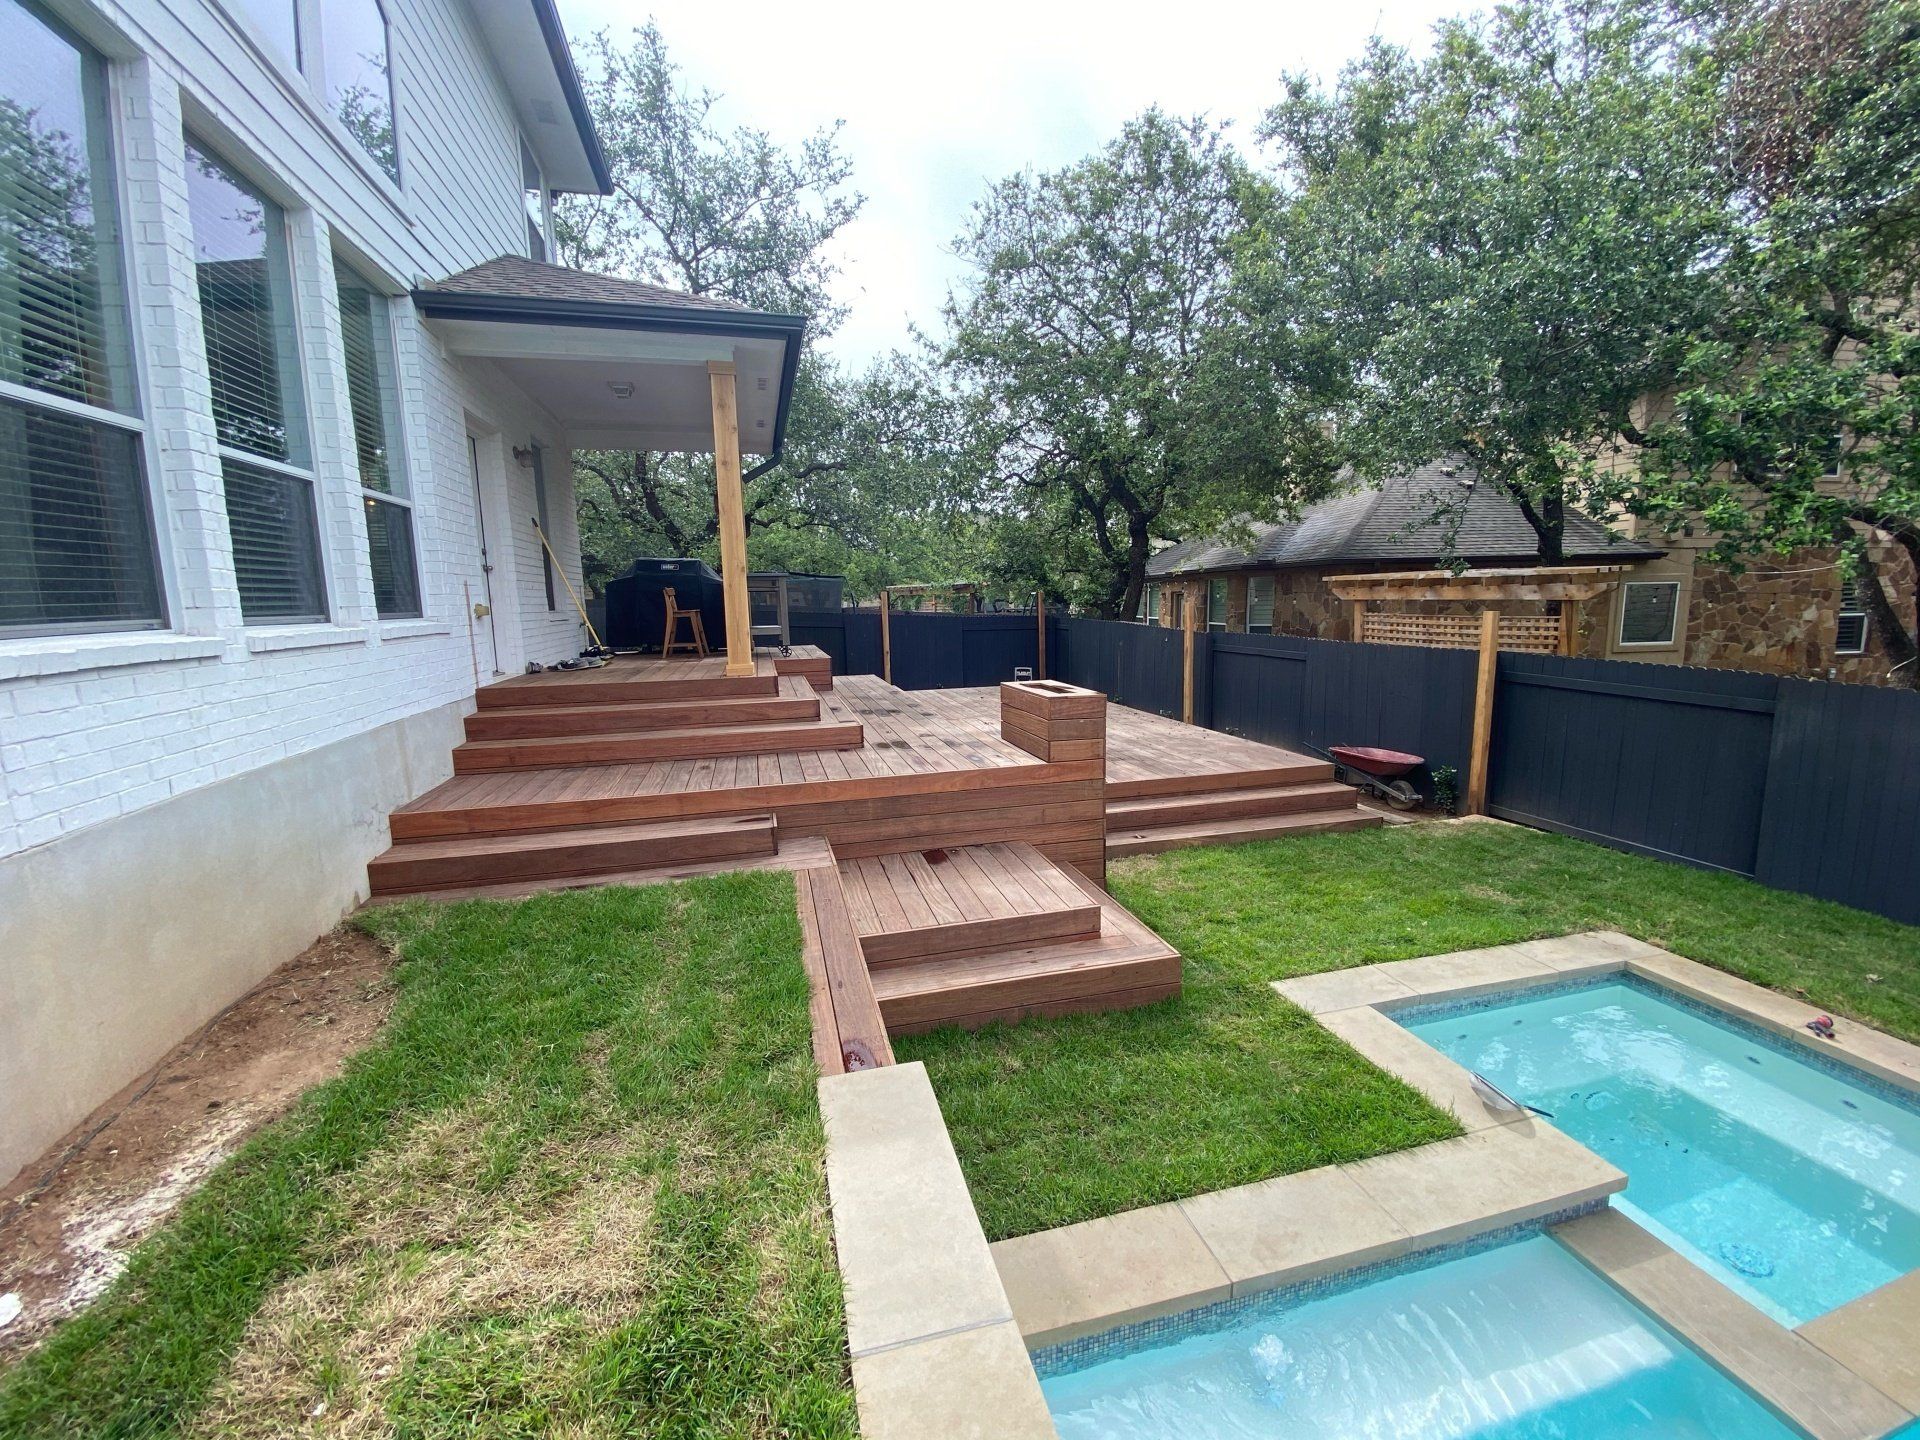 patio steps and shallow pool